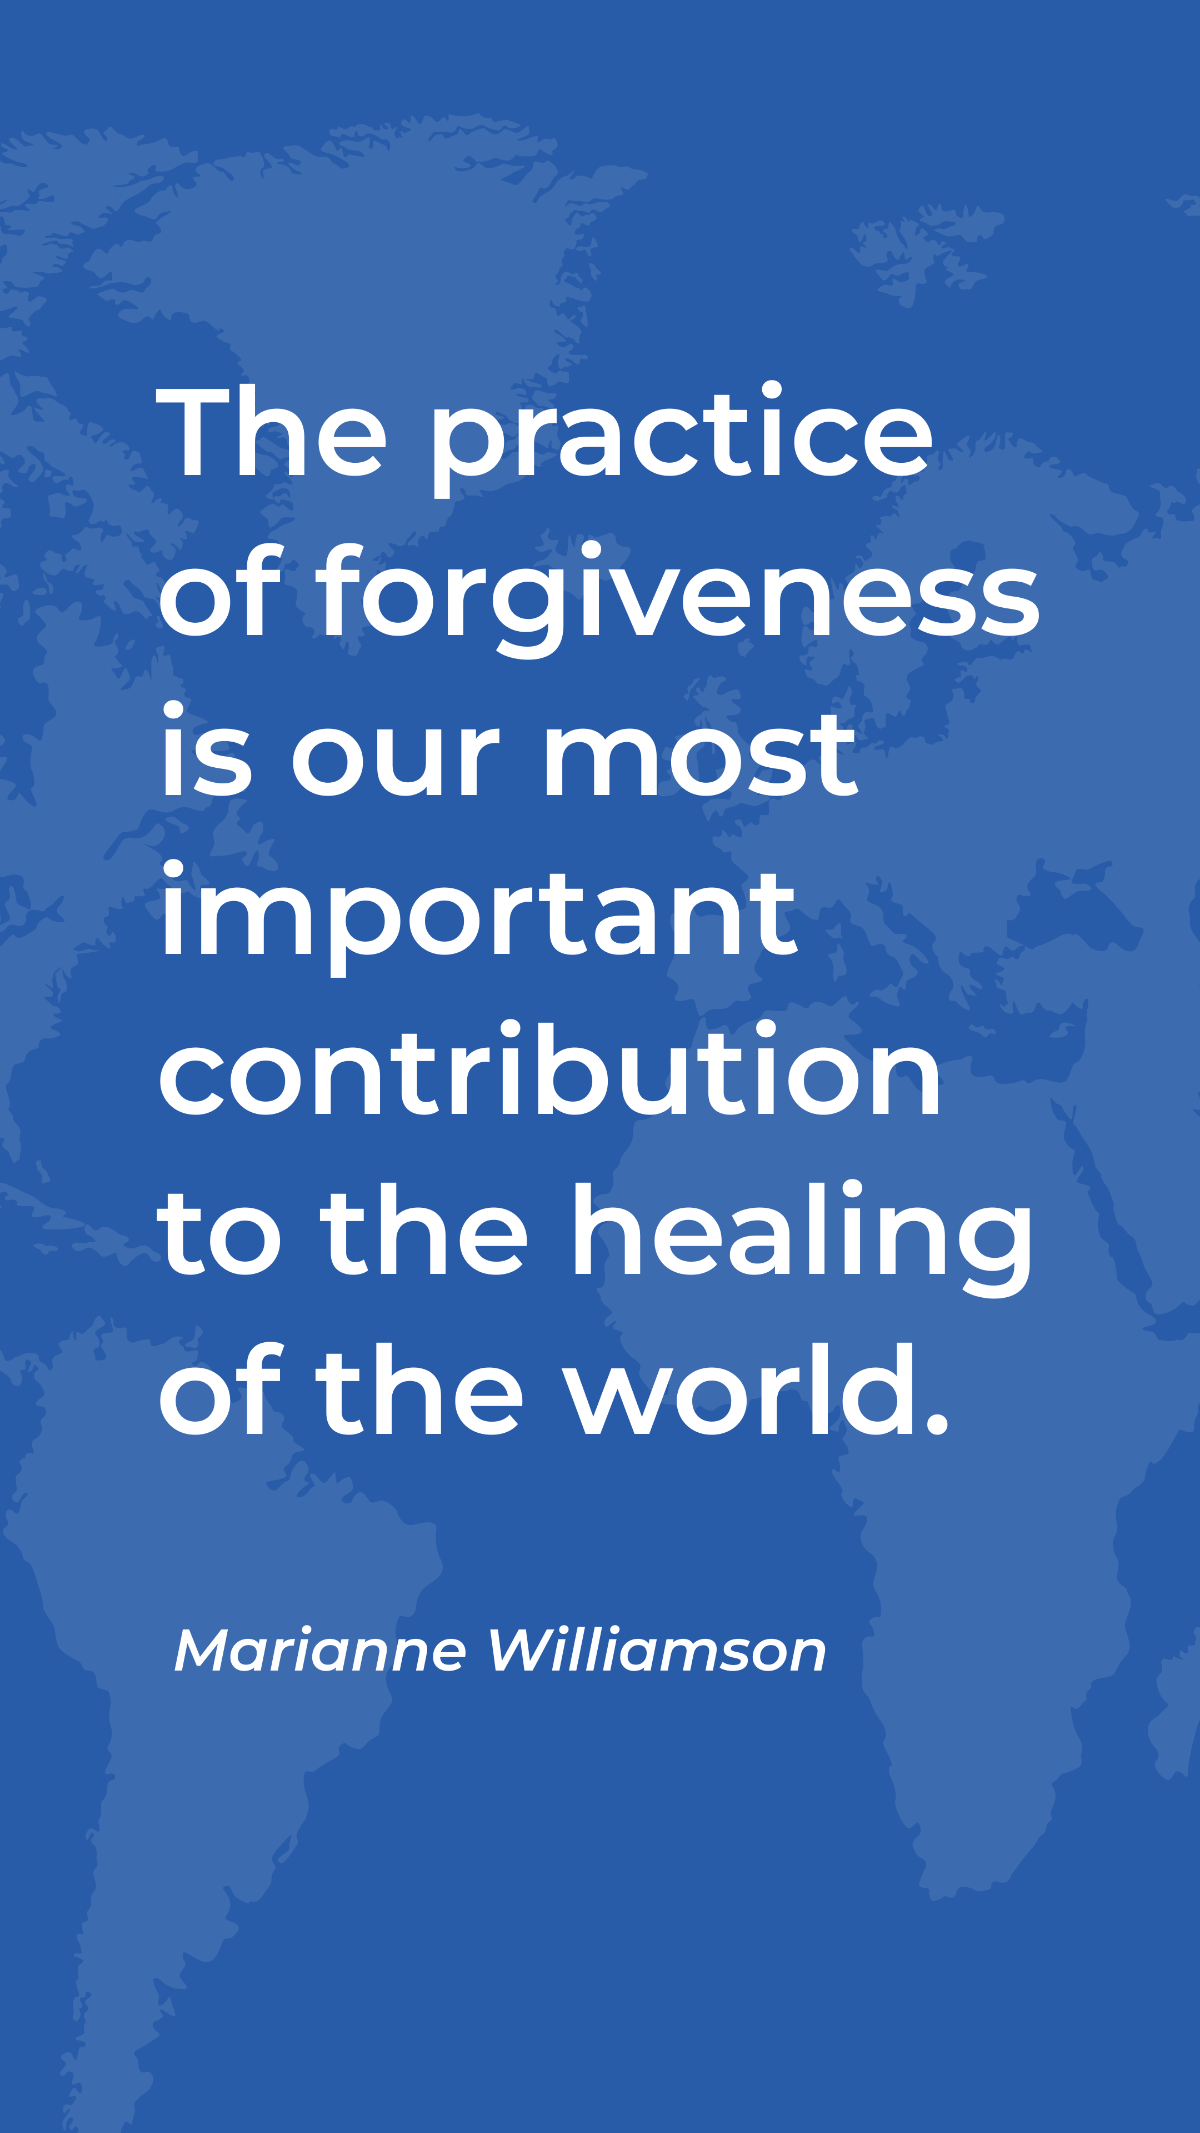 Marianne Williamson - The practice of forgiveness is our most important contribution to the healing of the world. Template